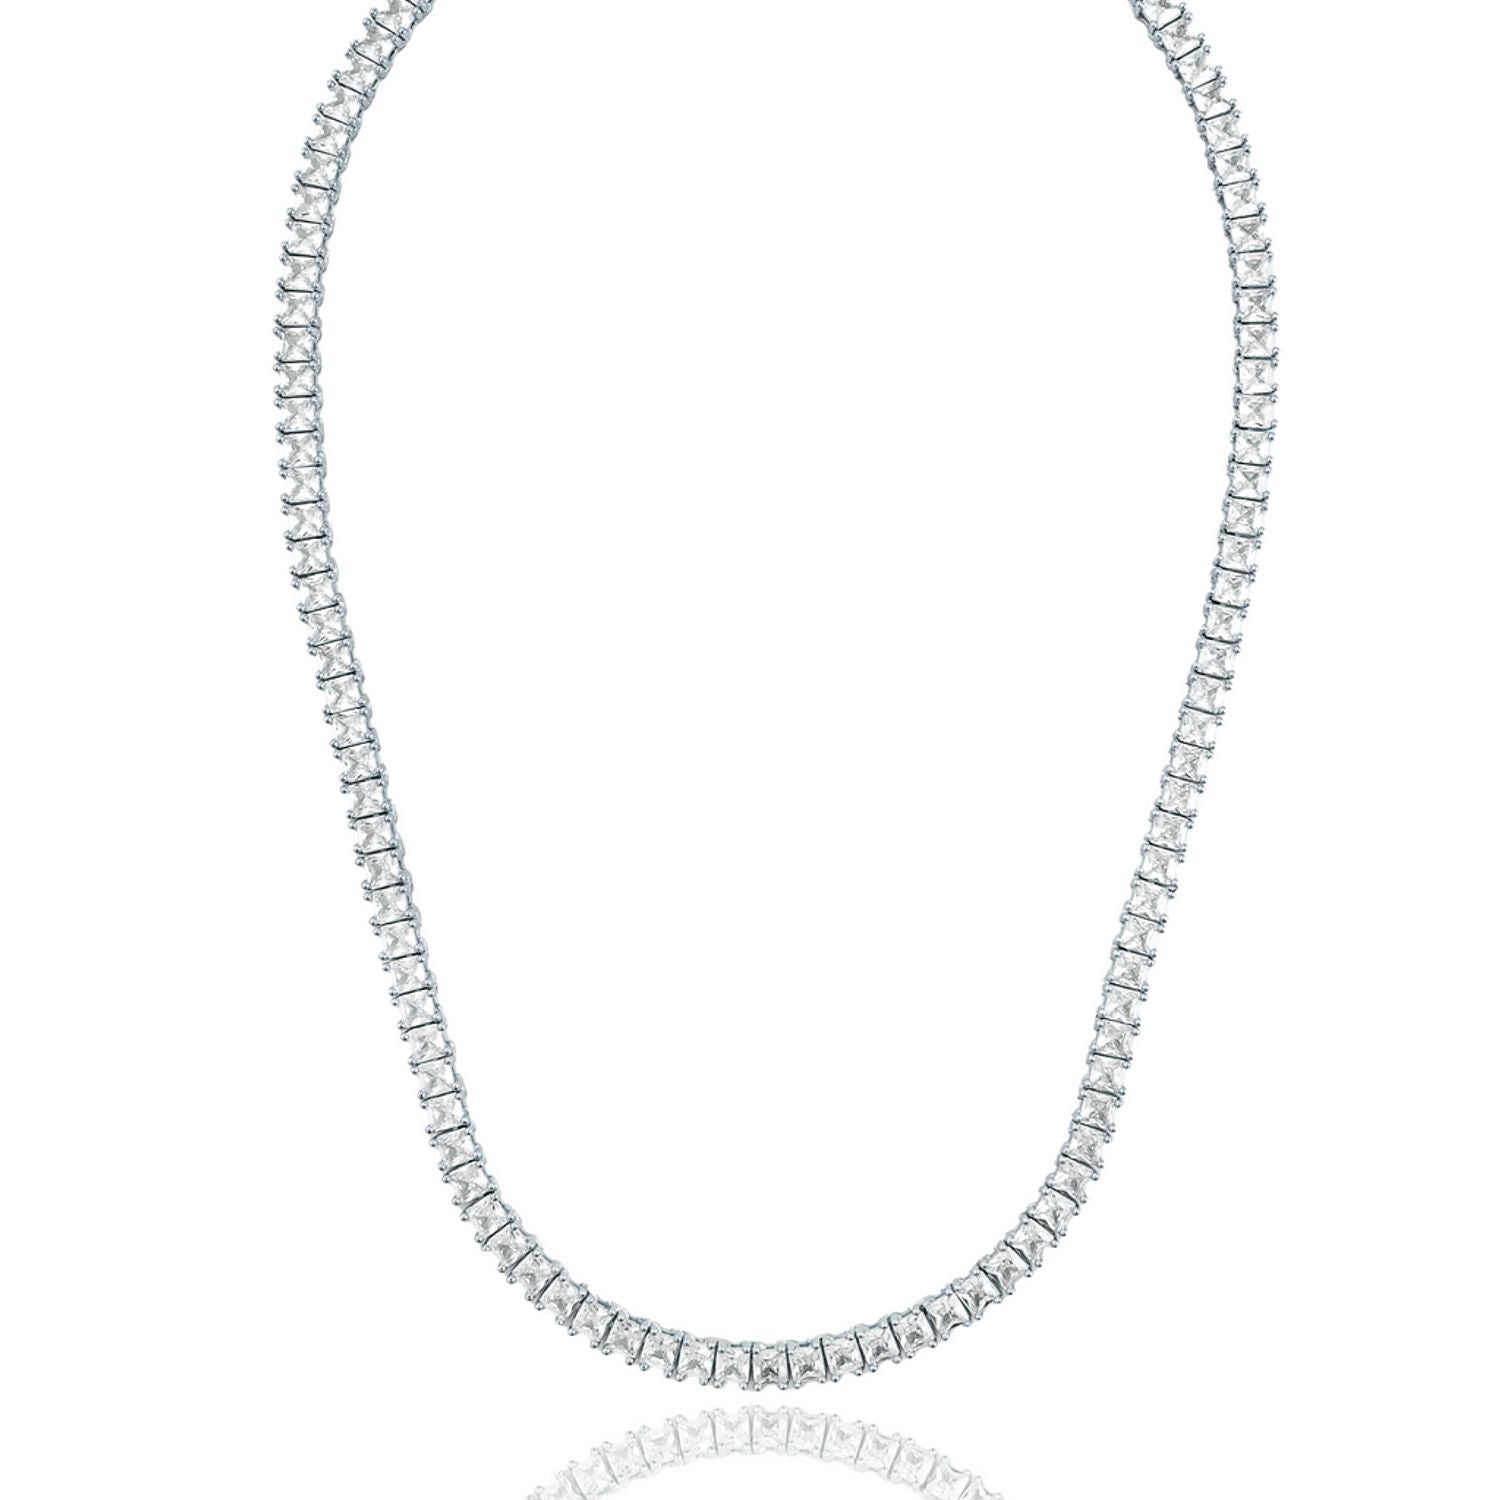 Clear Square CZ Stones Tennis Necklace (F238)